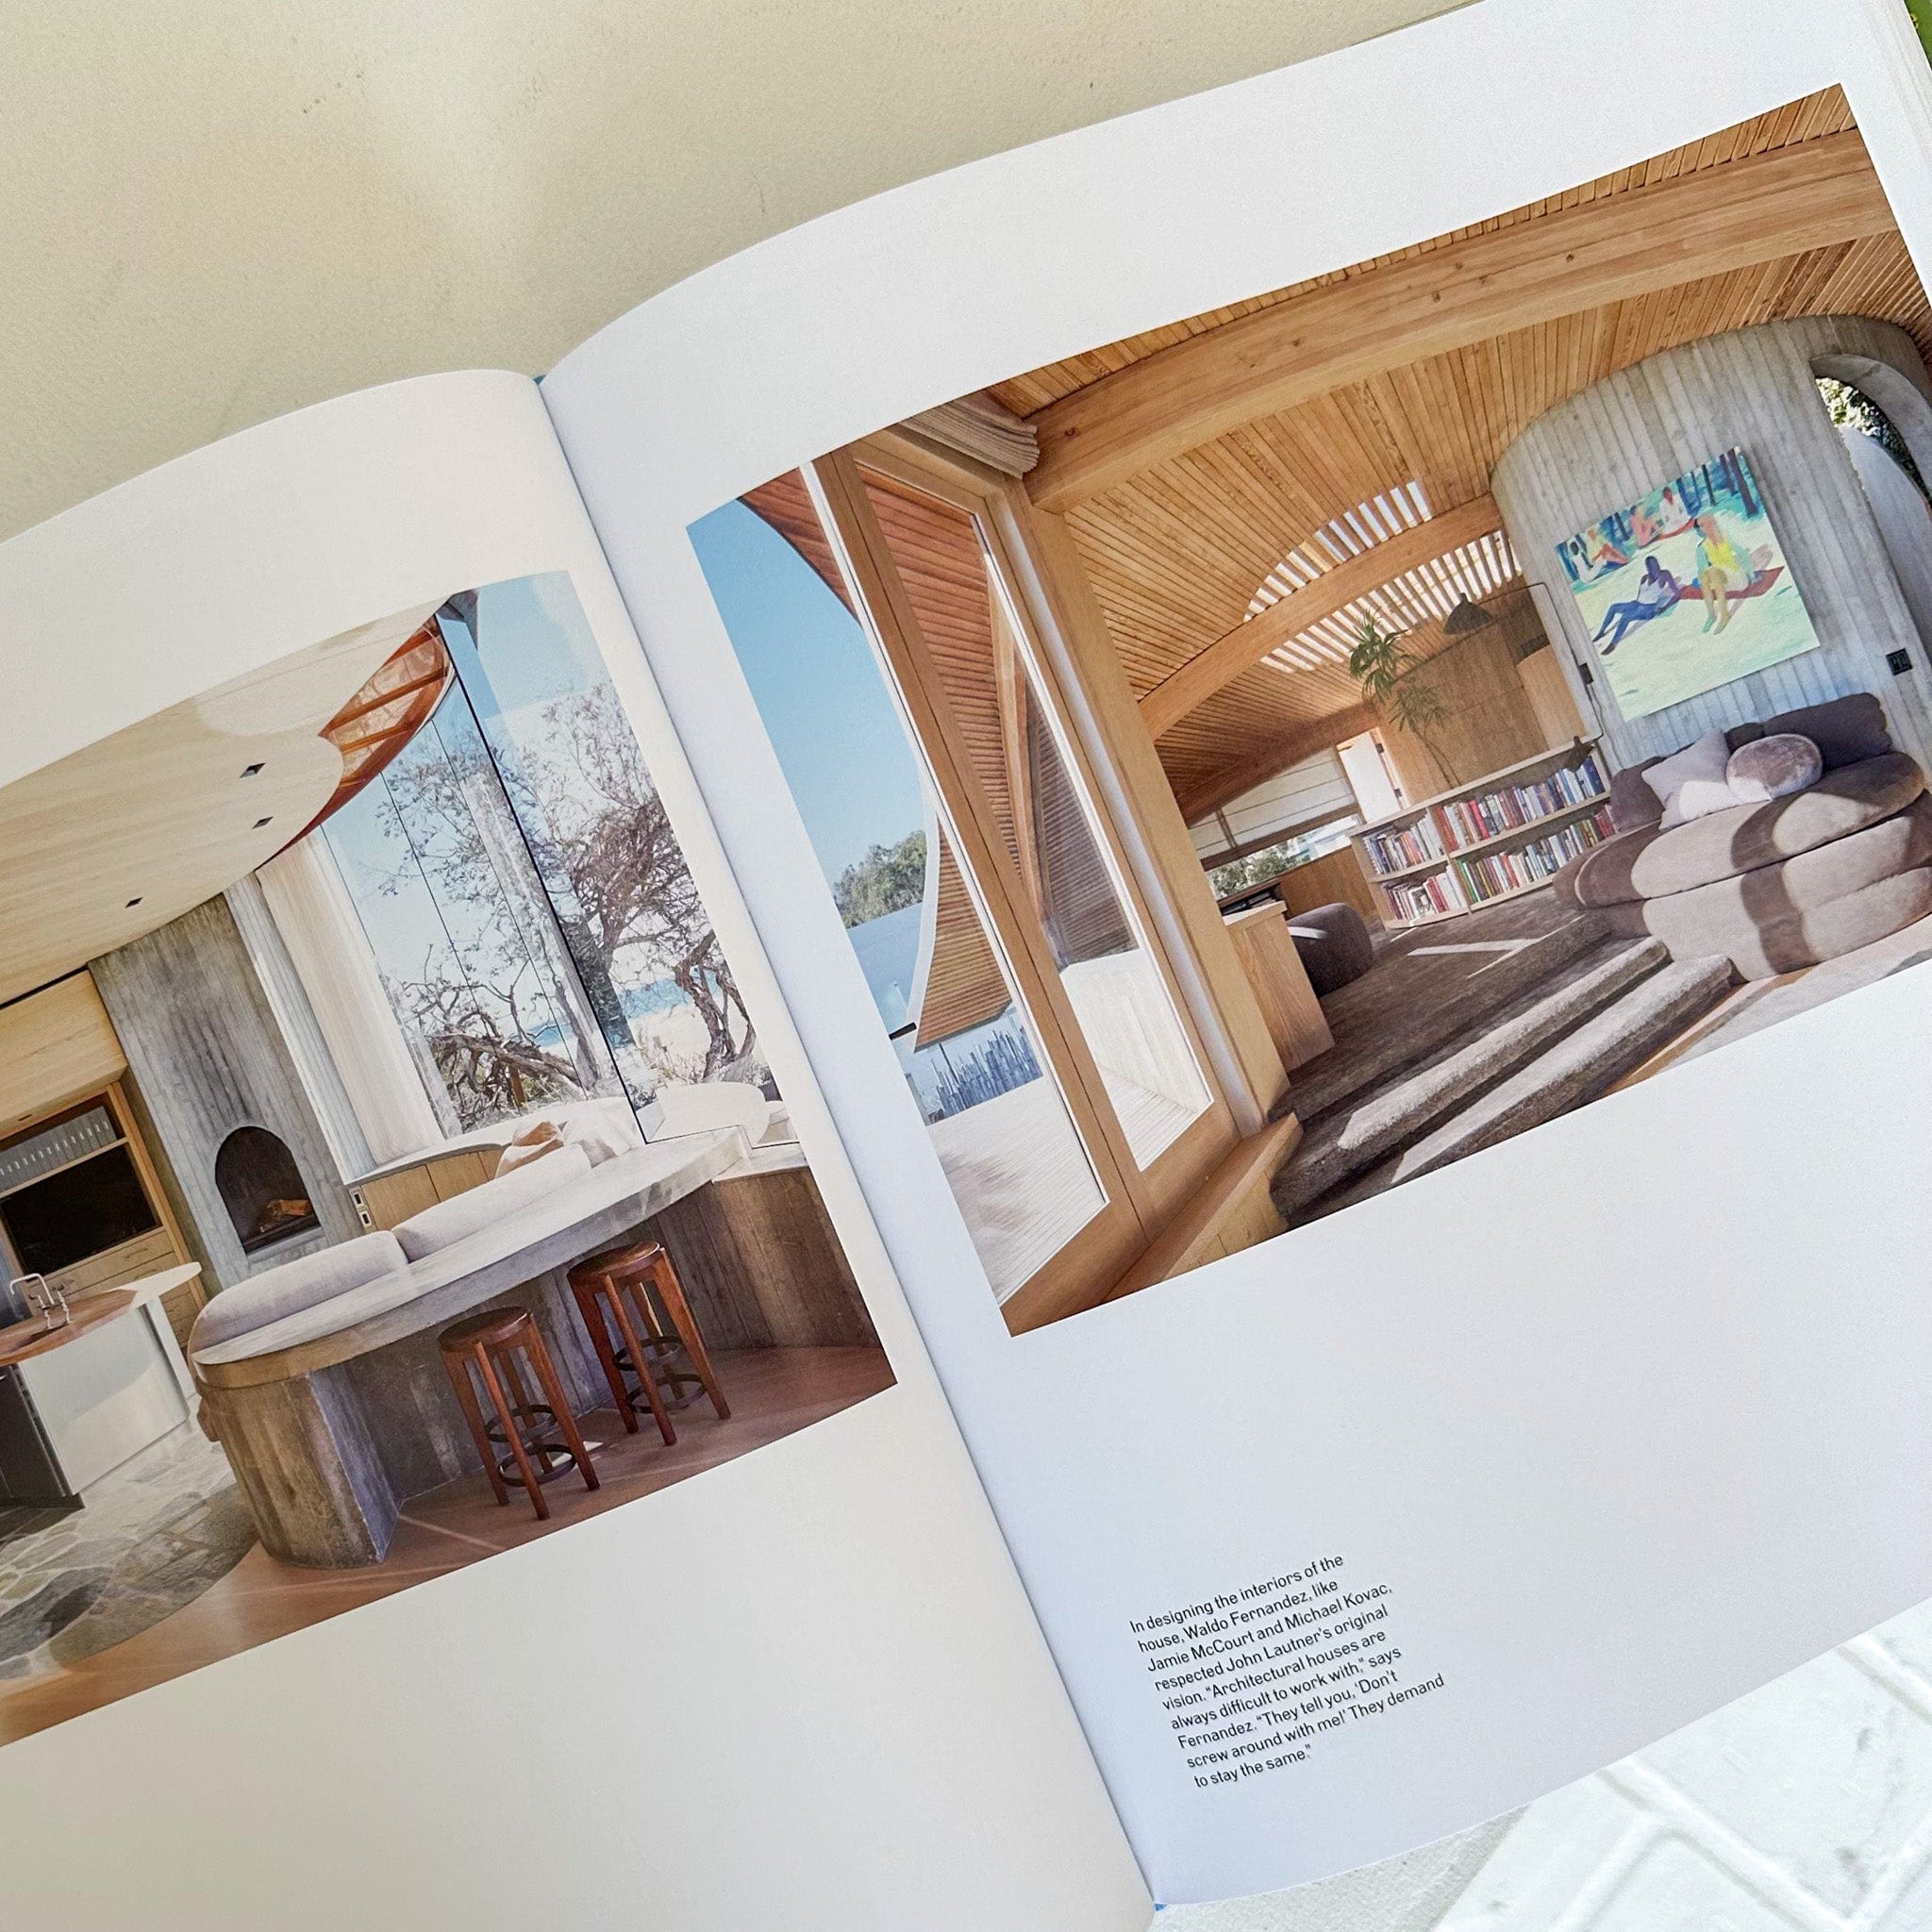 phaidon Books Beyond the Canyon: Inside Epic California Homes by Roger Davies